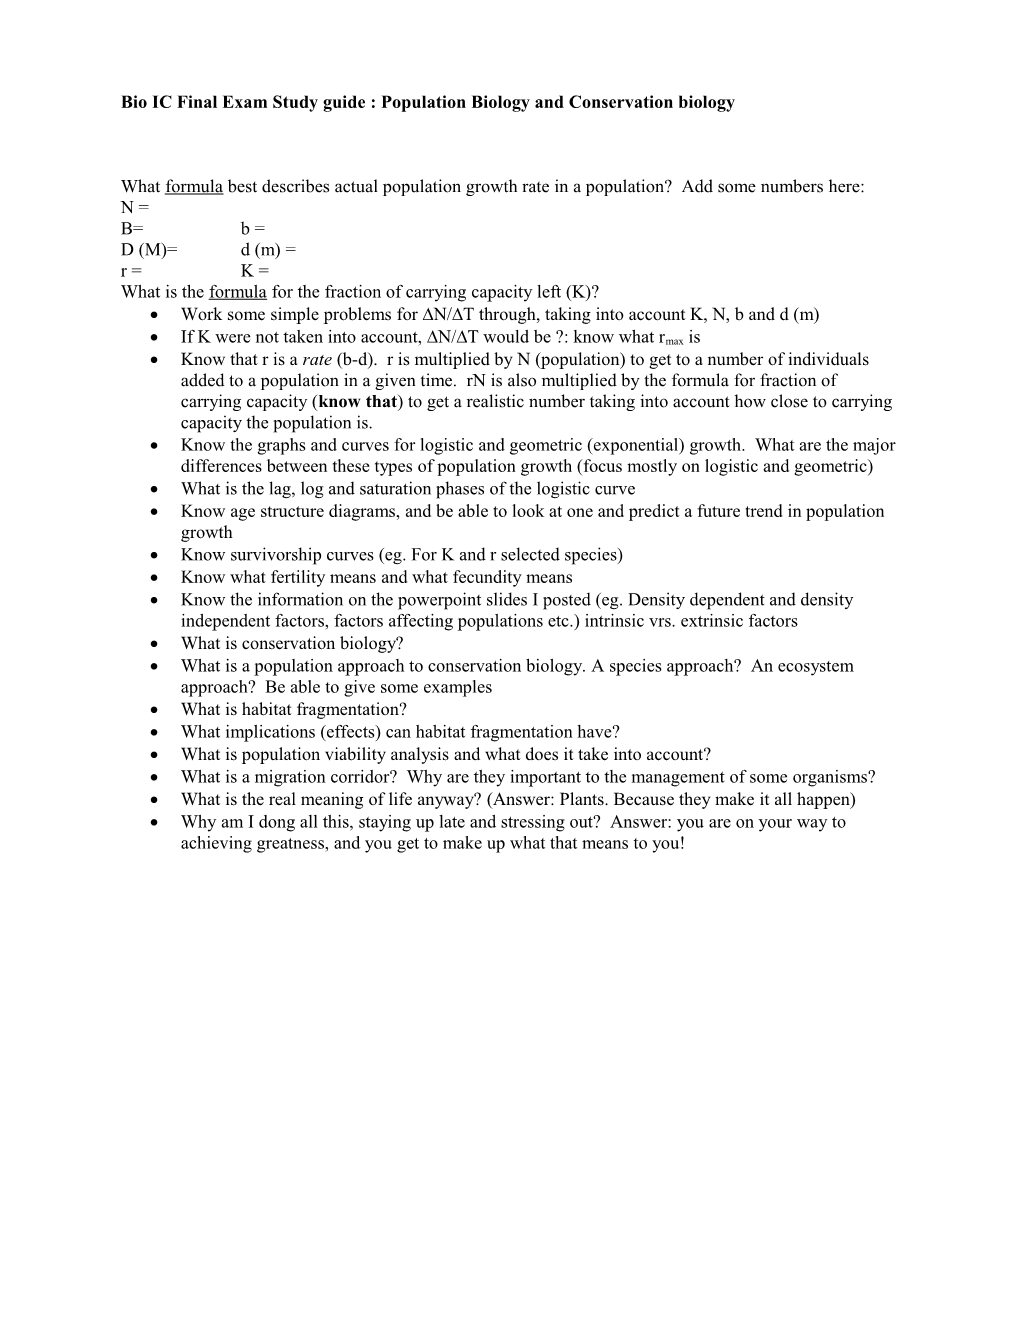 Bio IC Final Exam Study Guide : Population Biology and Conservation Biology